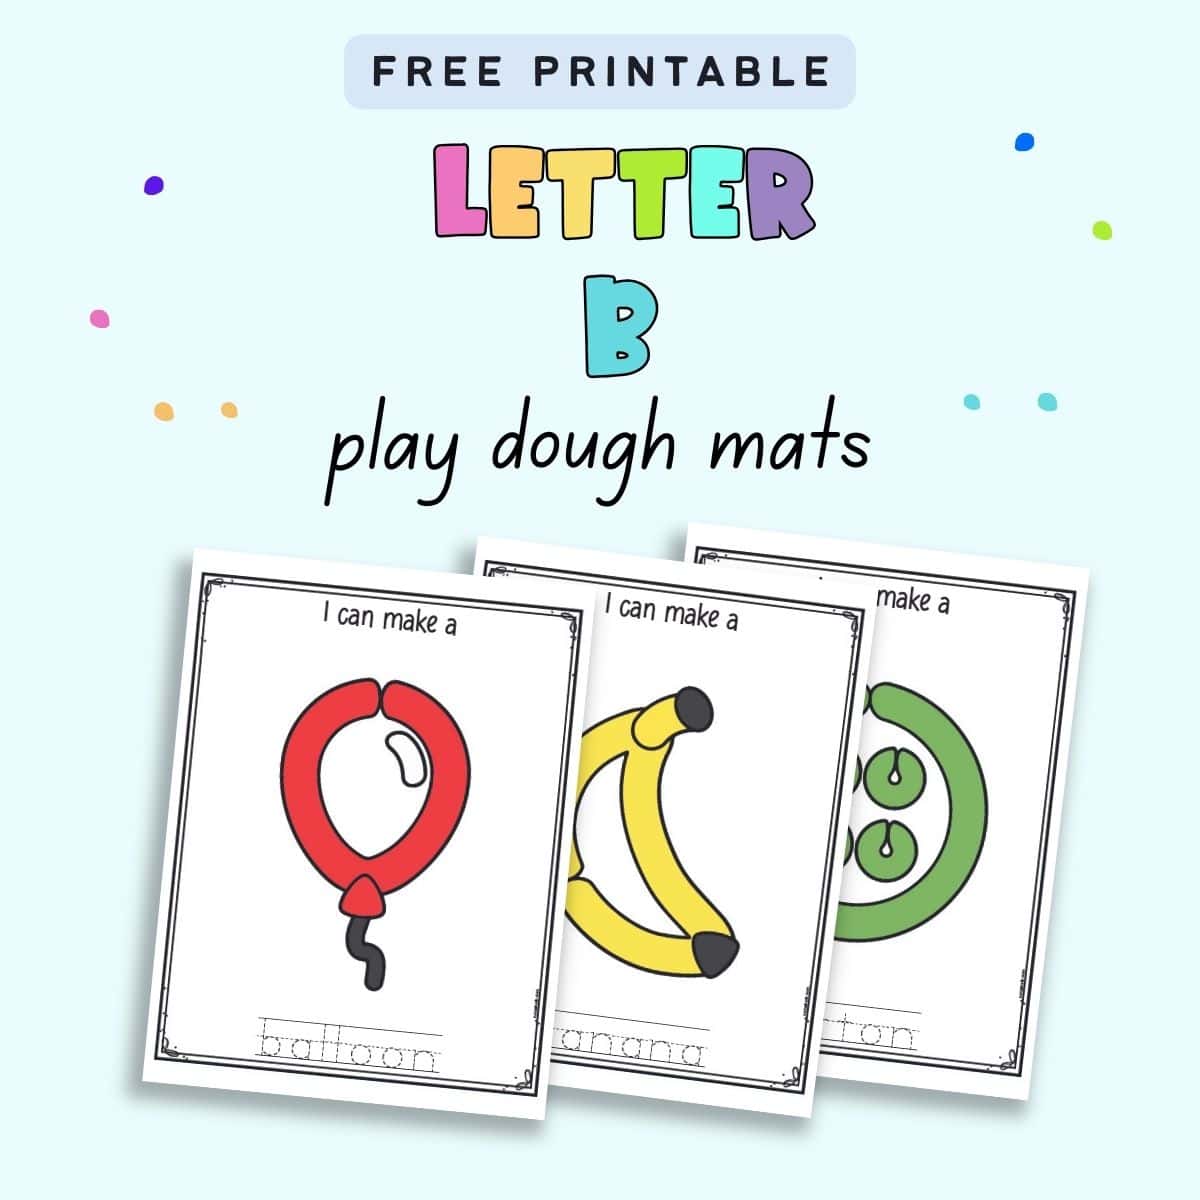 Text "free printable letter B play dough mats" and three play dough mats. One shows a balloon, another a banana, and the third a button 